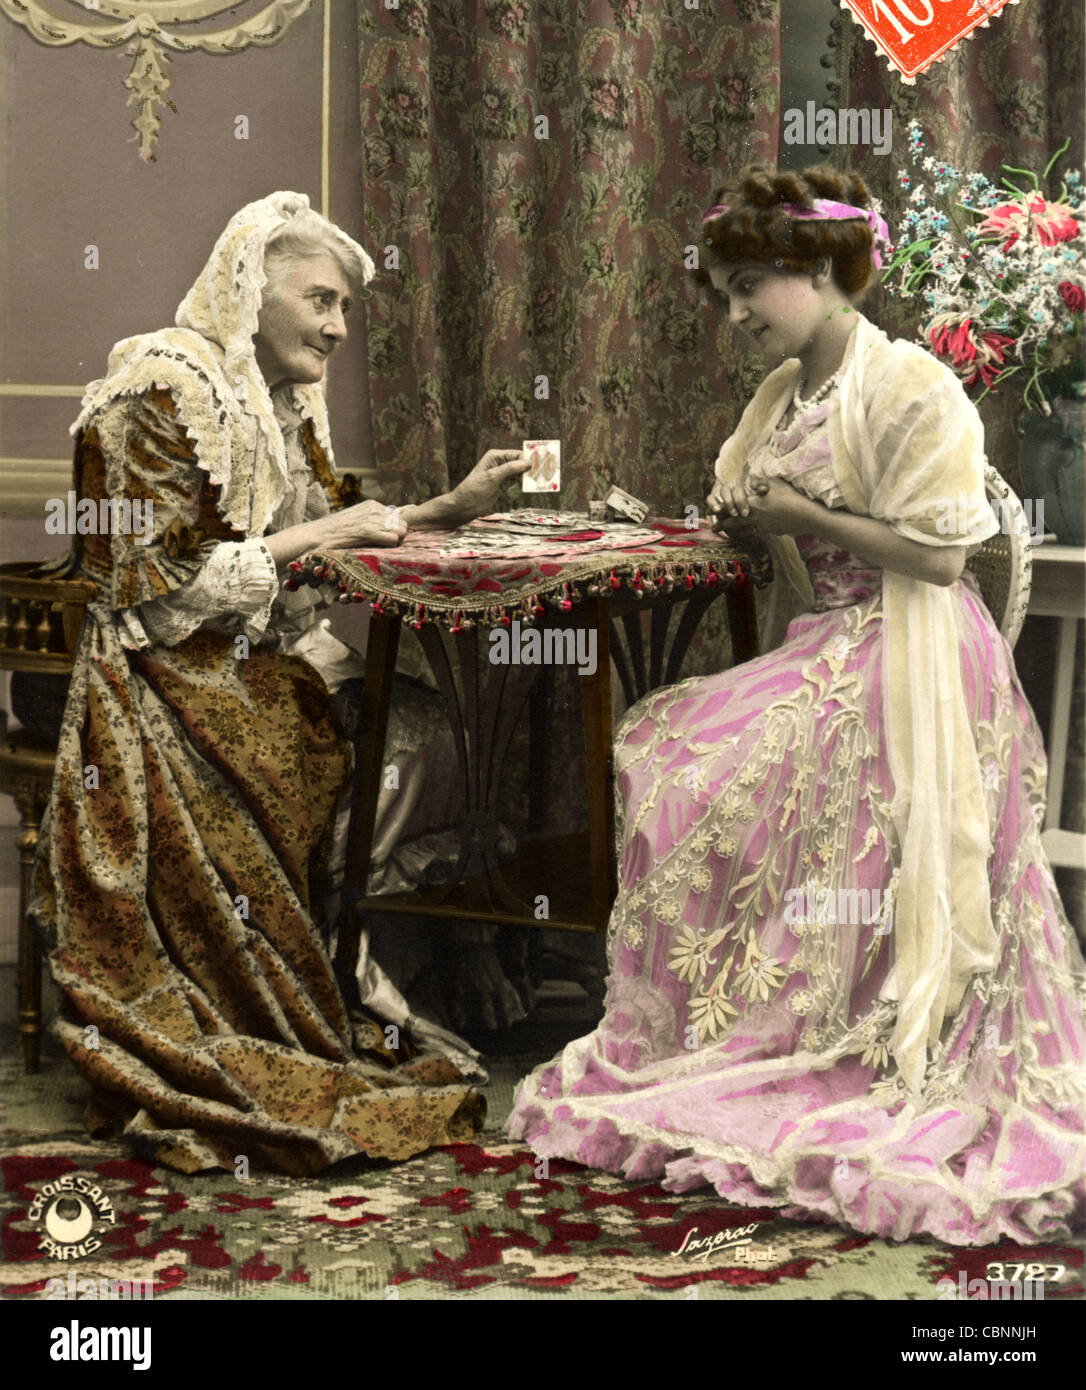 Old Gypsy Fortune Teller Tells Young Beauty's Fortune Stock Photo - Alamy